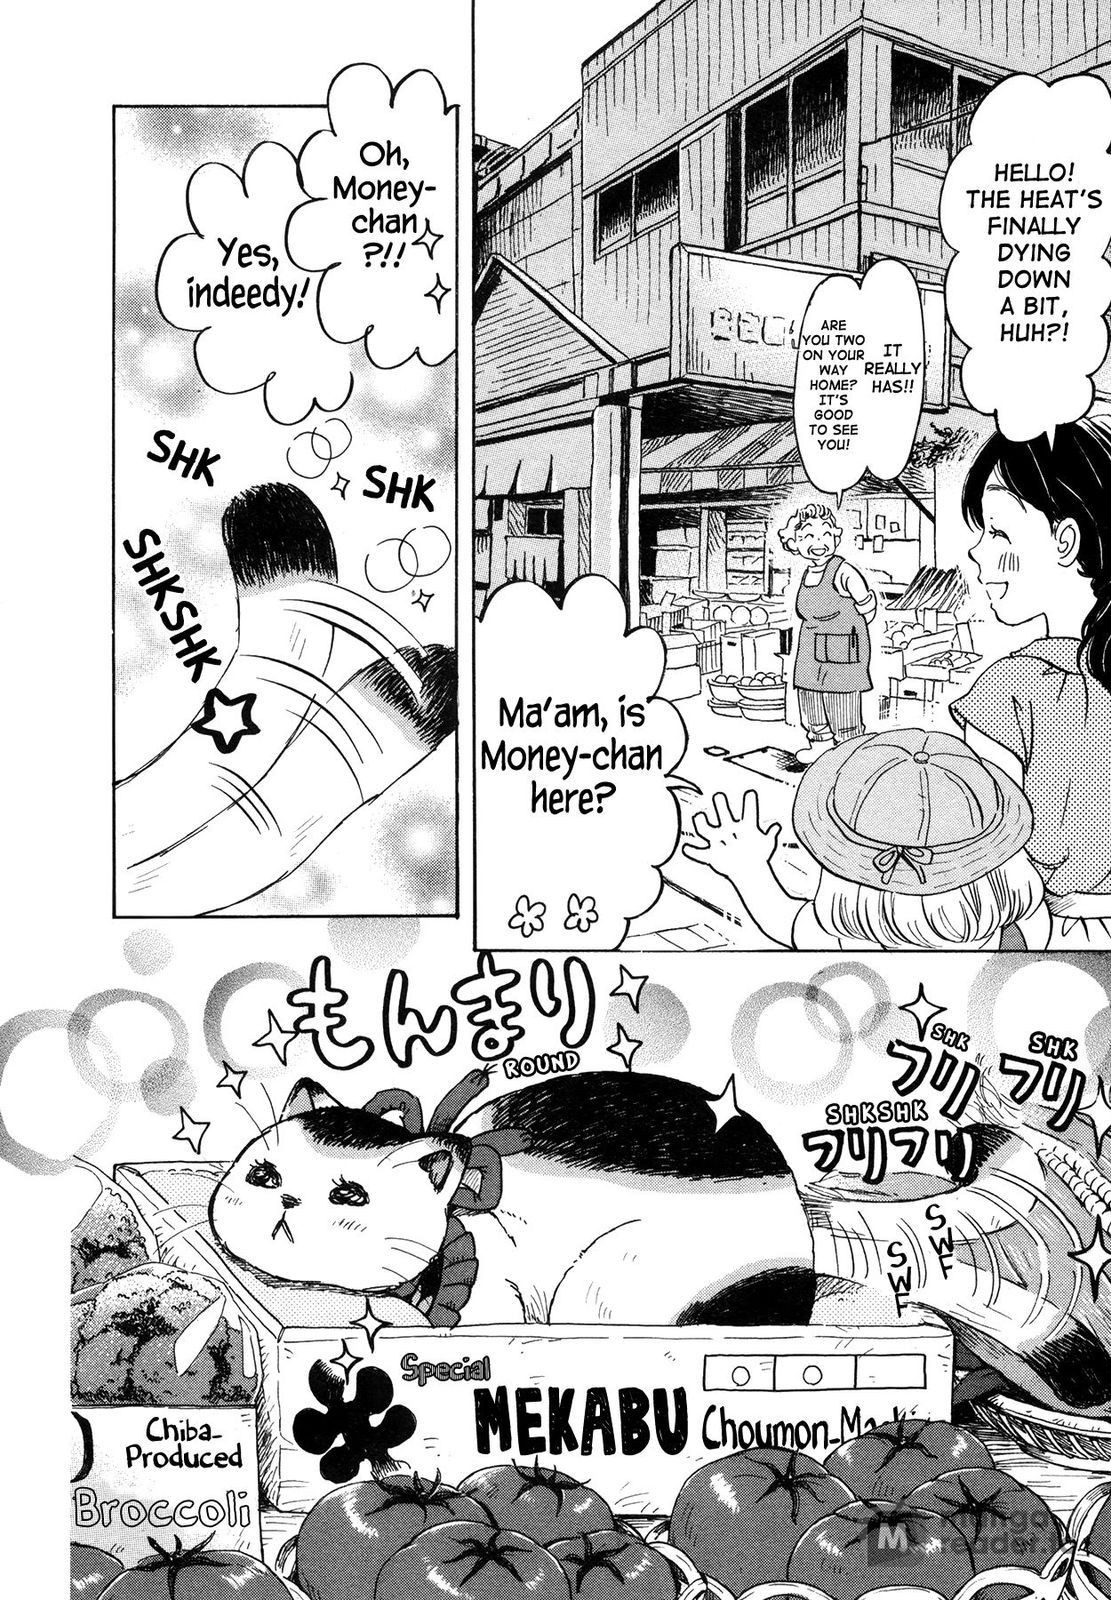 March Comes in Like a Lion, Chapter 140 Fluffy Treasure (EN) image 13